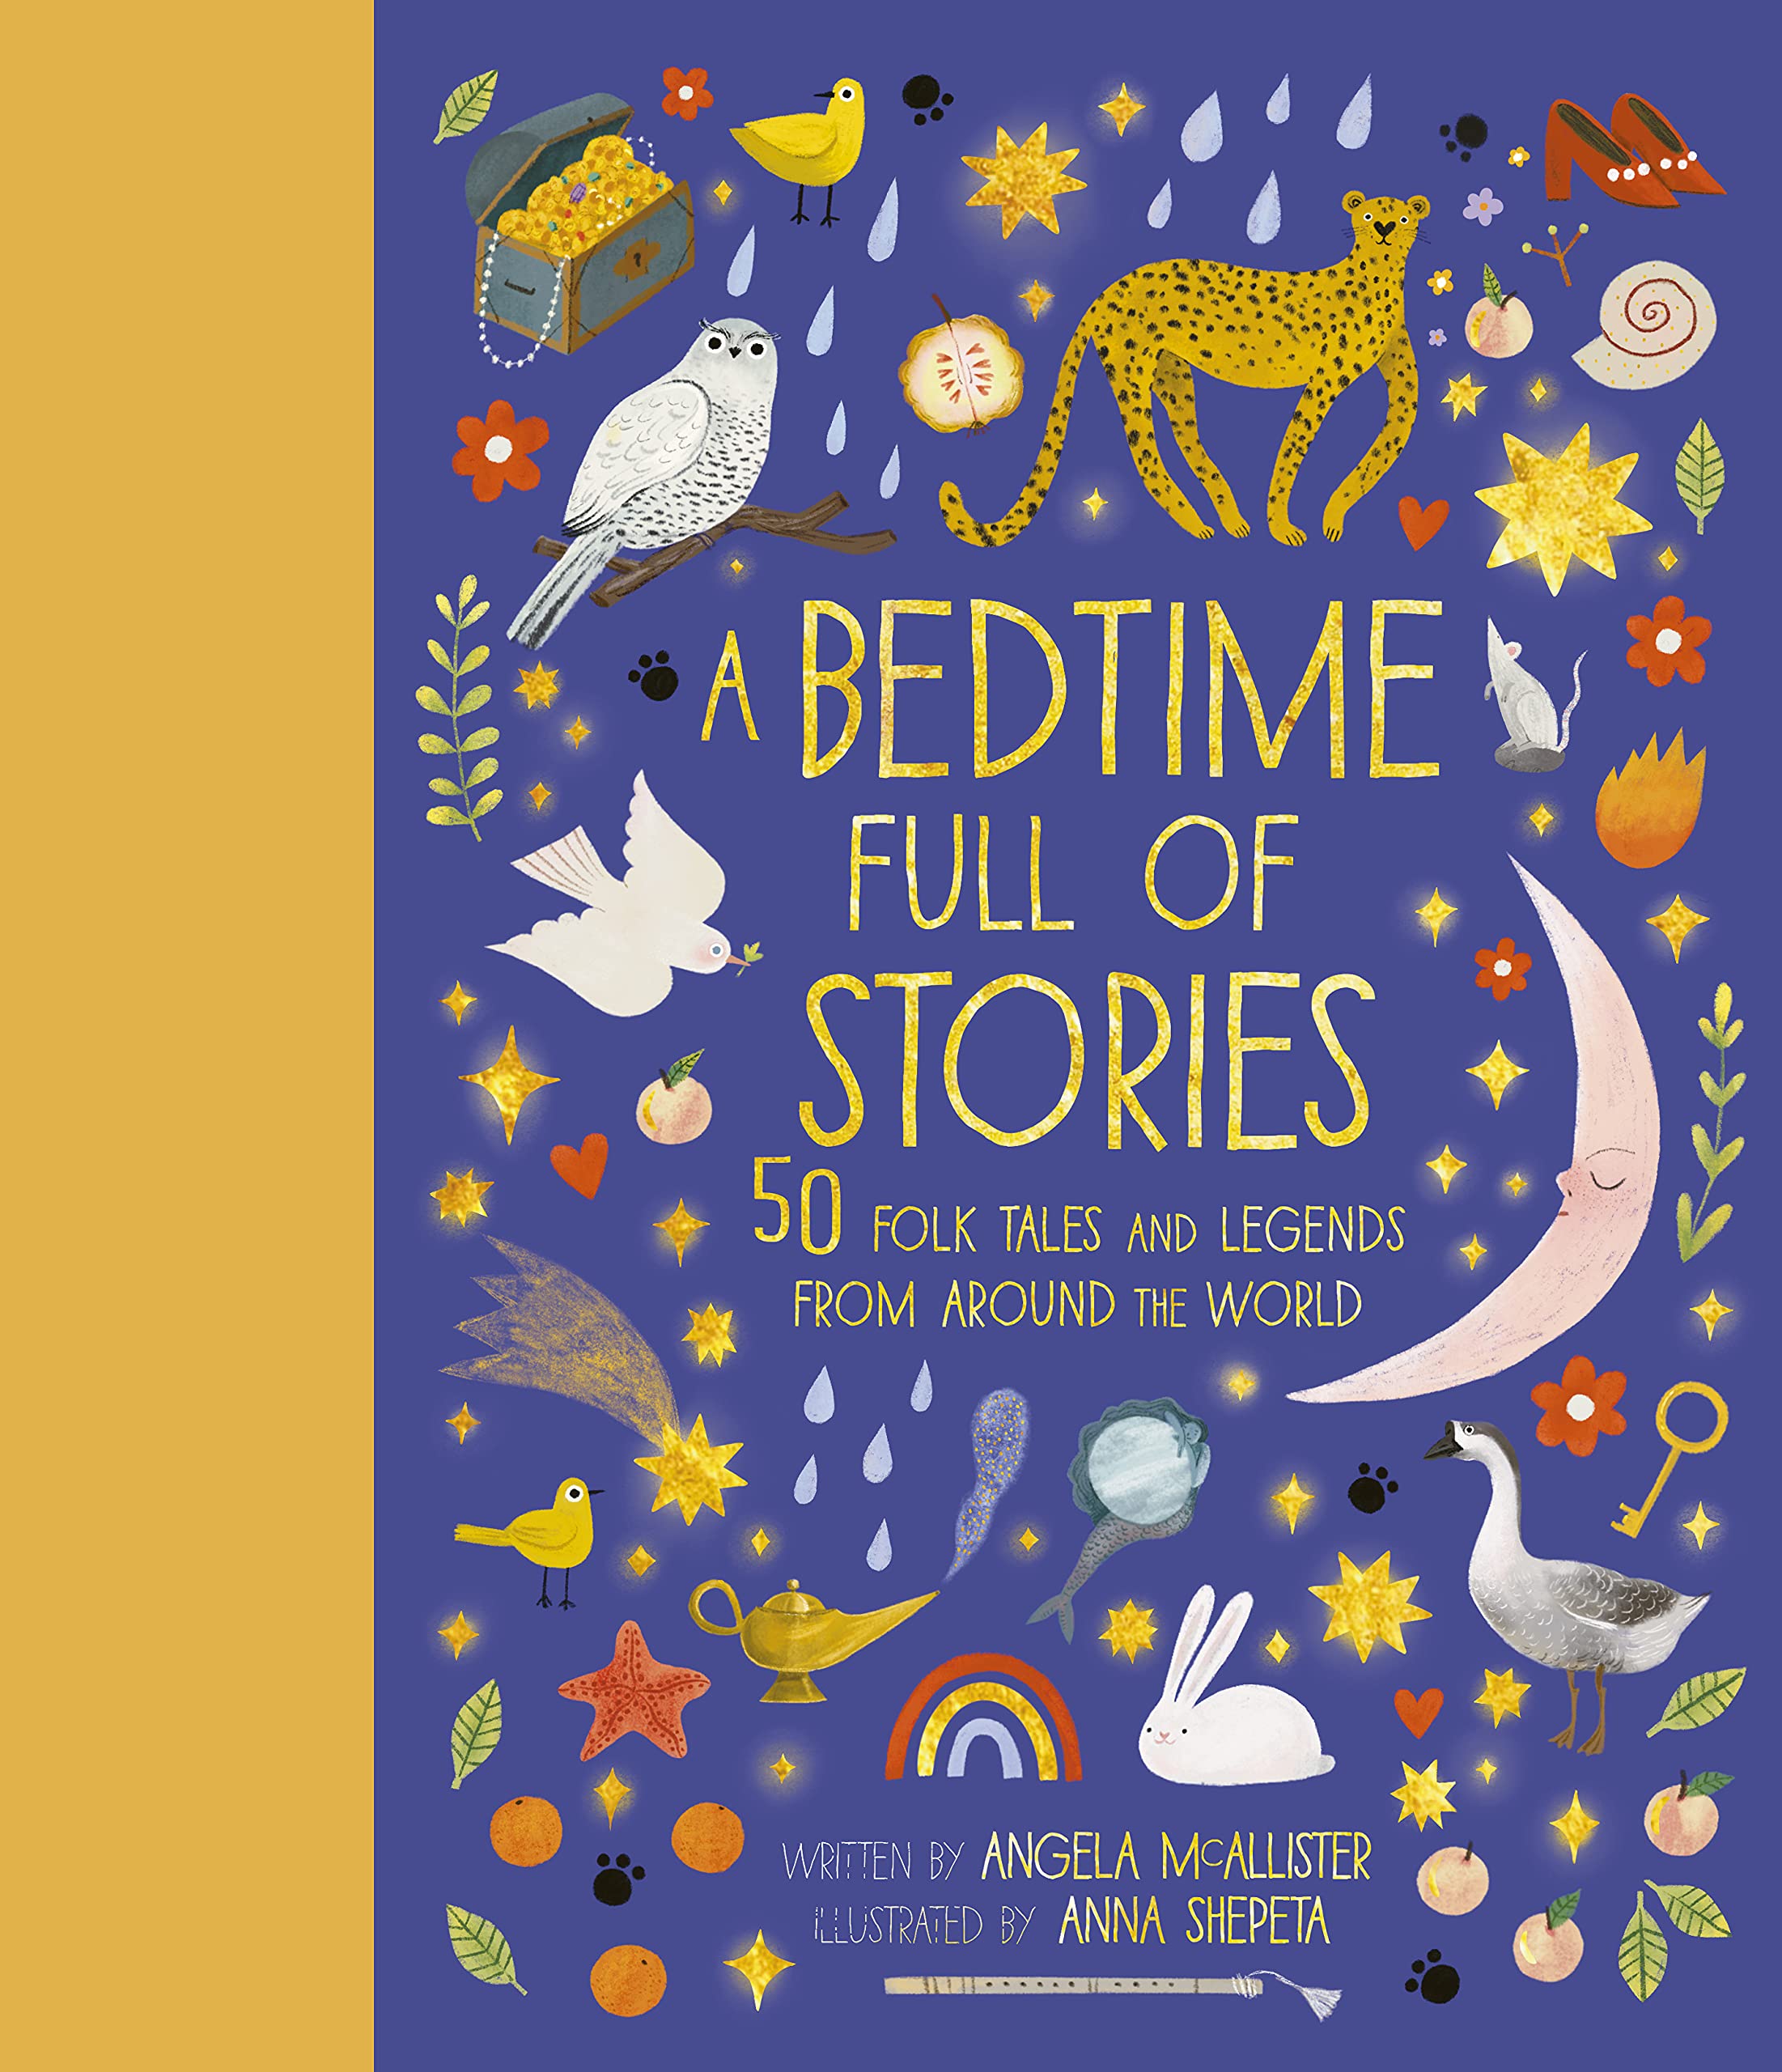 A Bedtime Full of Stories | 20 image11